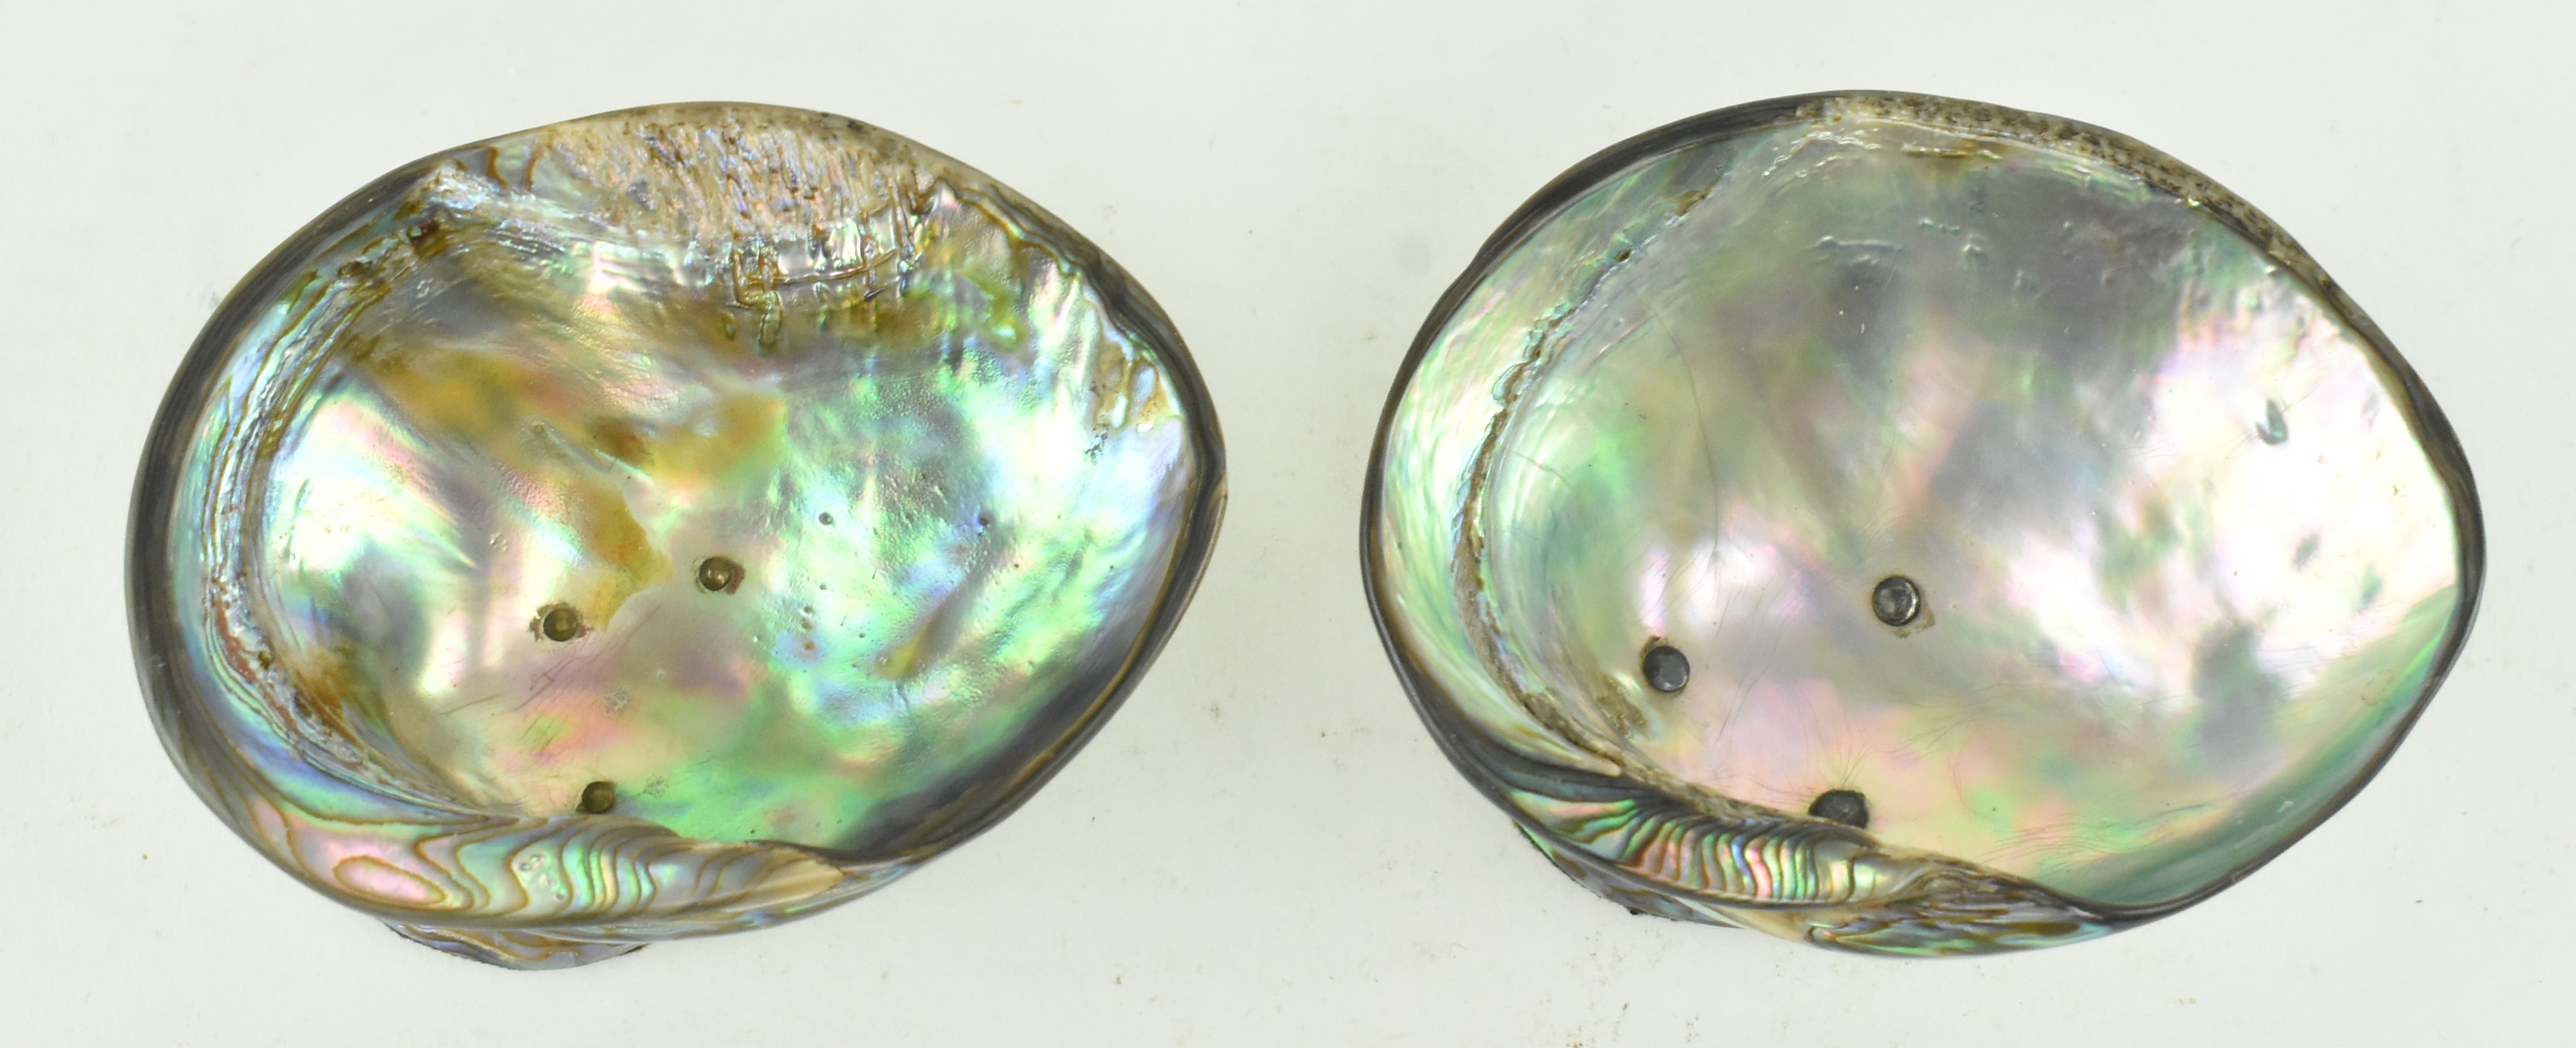 COLLECTION OF VINTAGE ABALONE ITEMS, INCL. SALT & PEPPER SHAKERS - Image 5 of 12